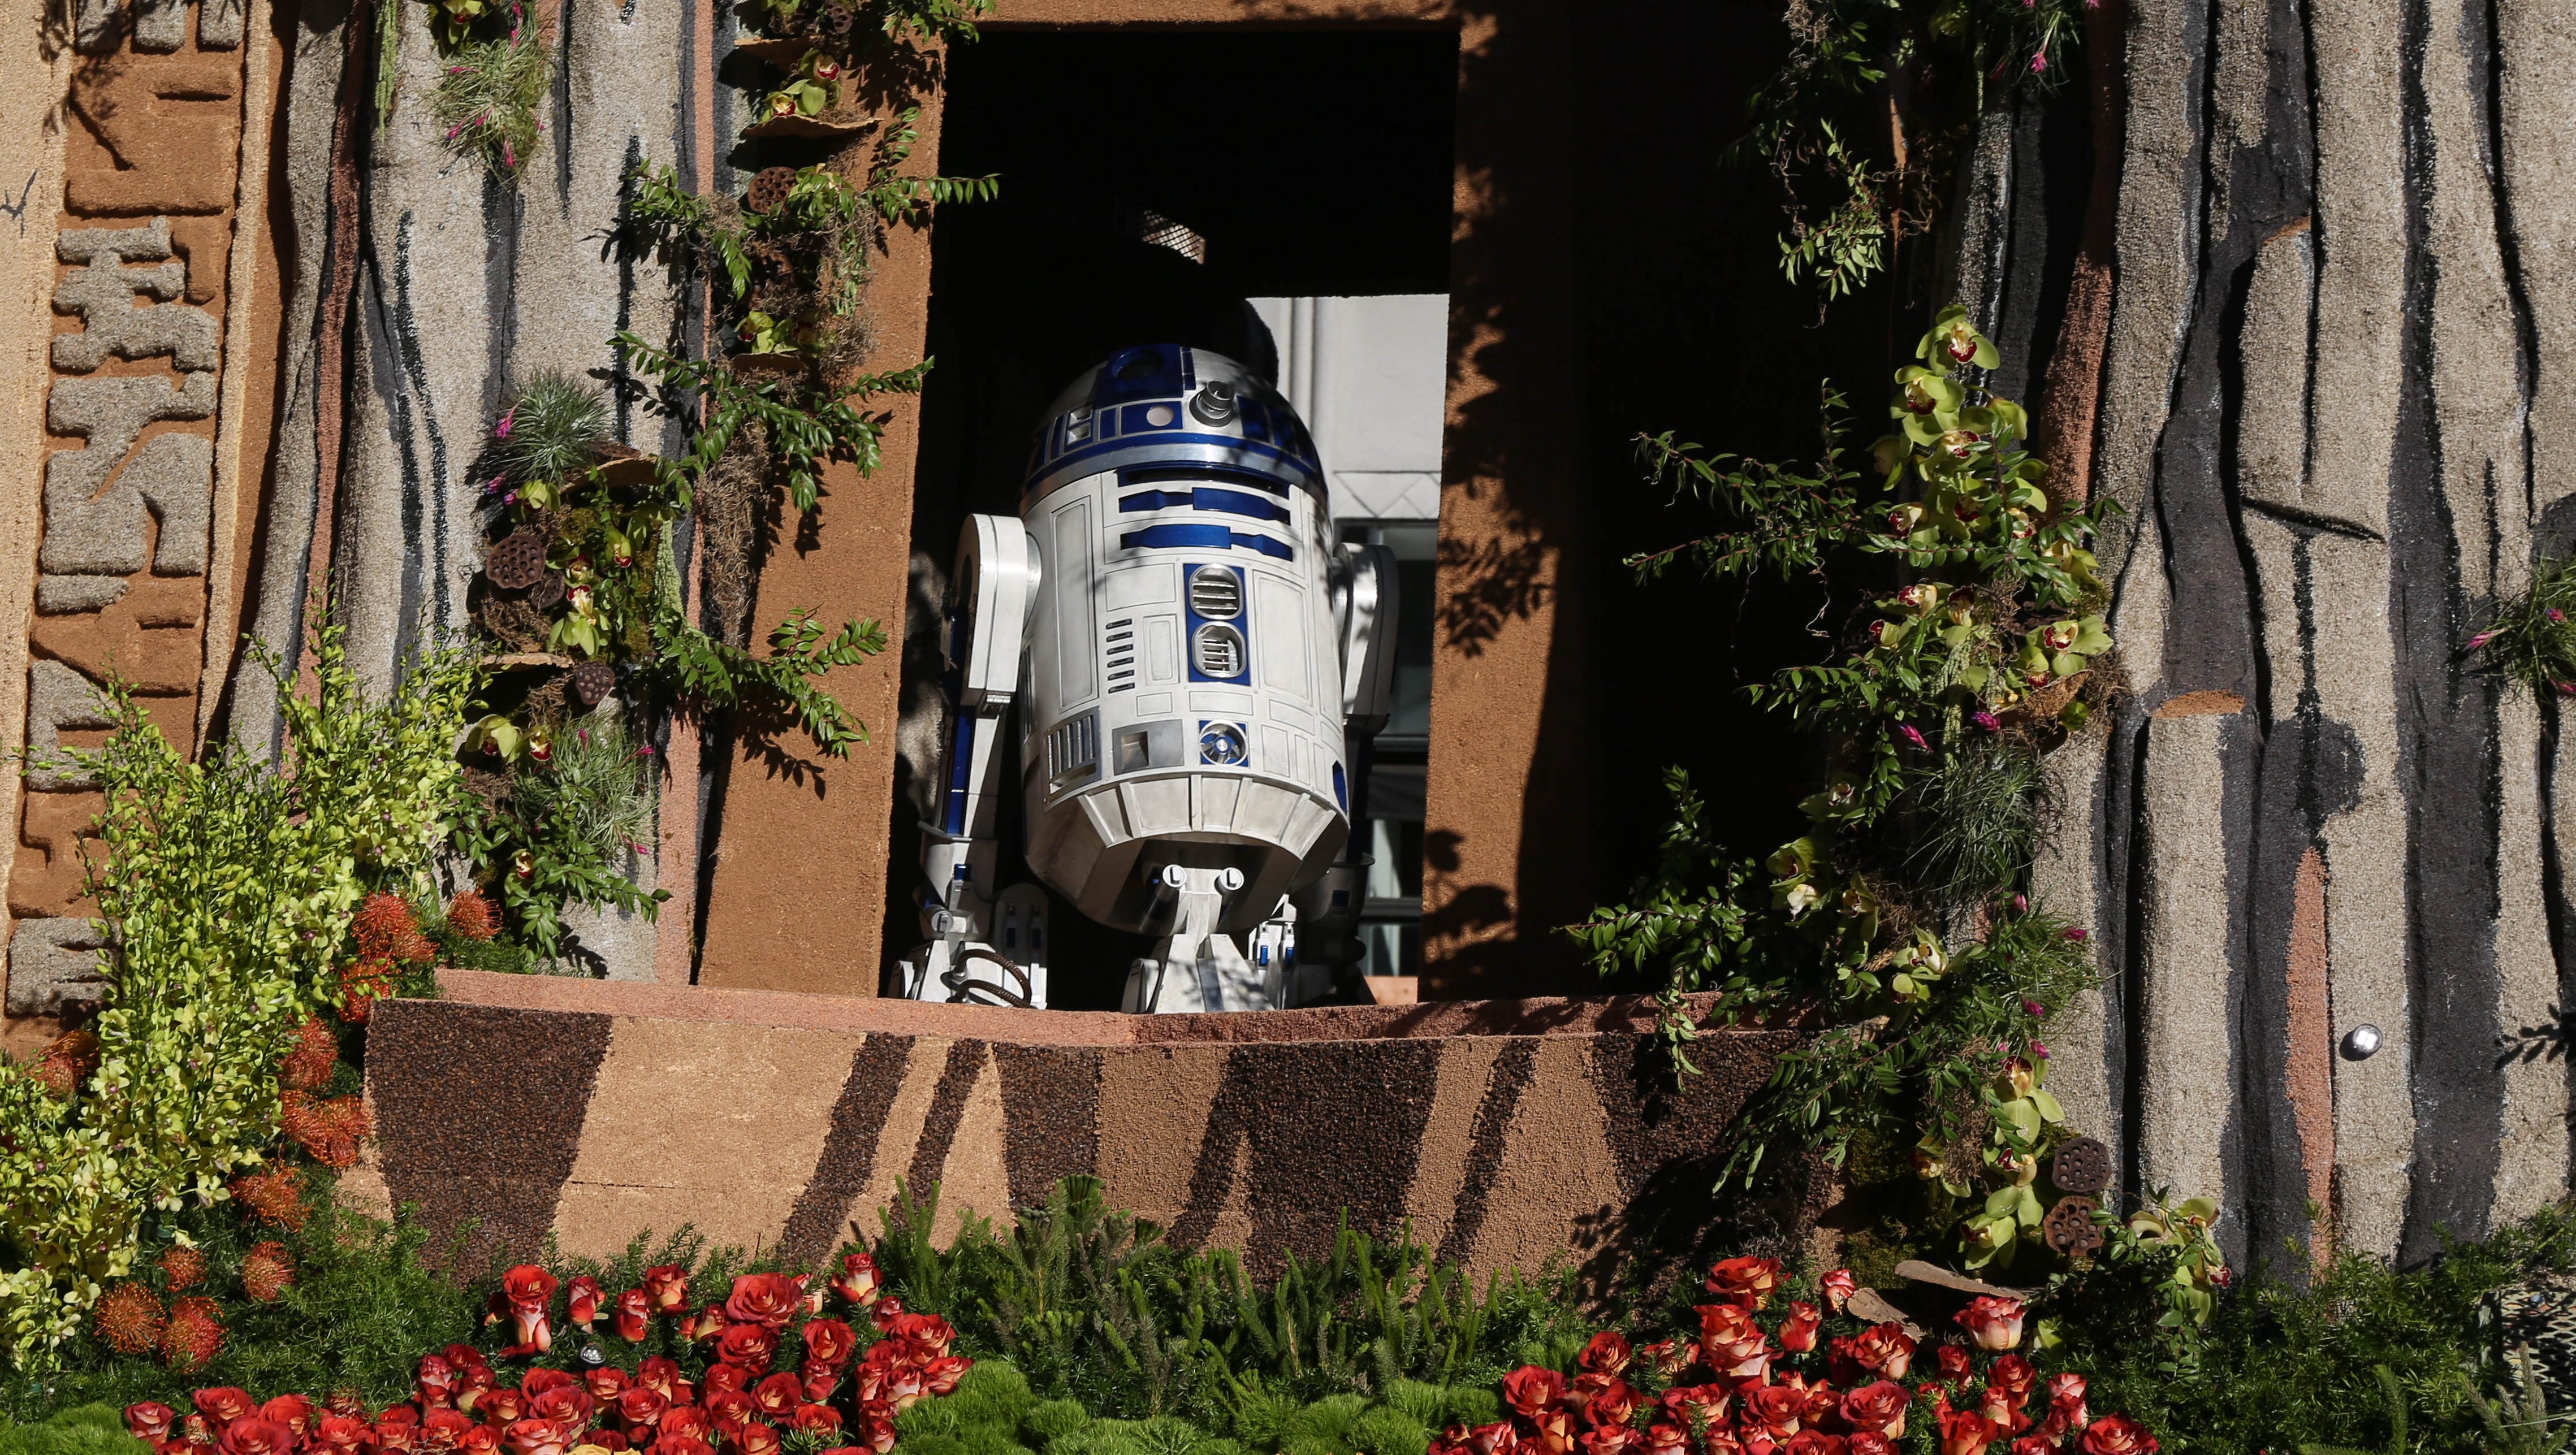 R2D2 rides the Disney float on Friday, Jan. 1, 2016, during the 2016 Tournament of Roses Parade in Pasadena, Calif.